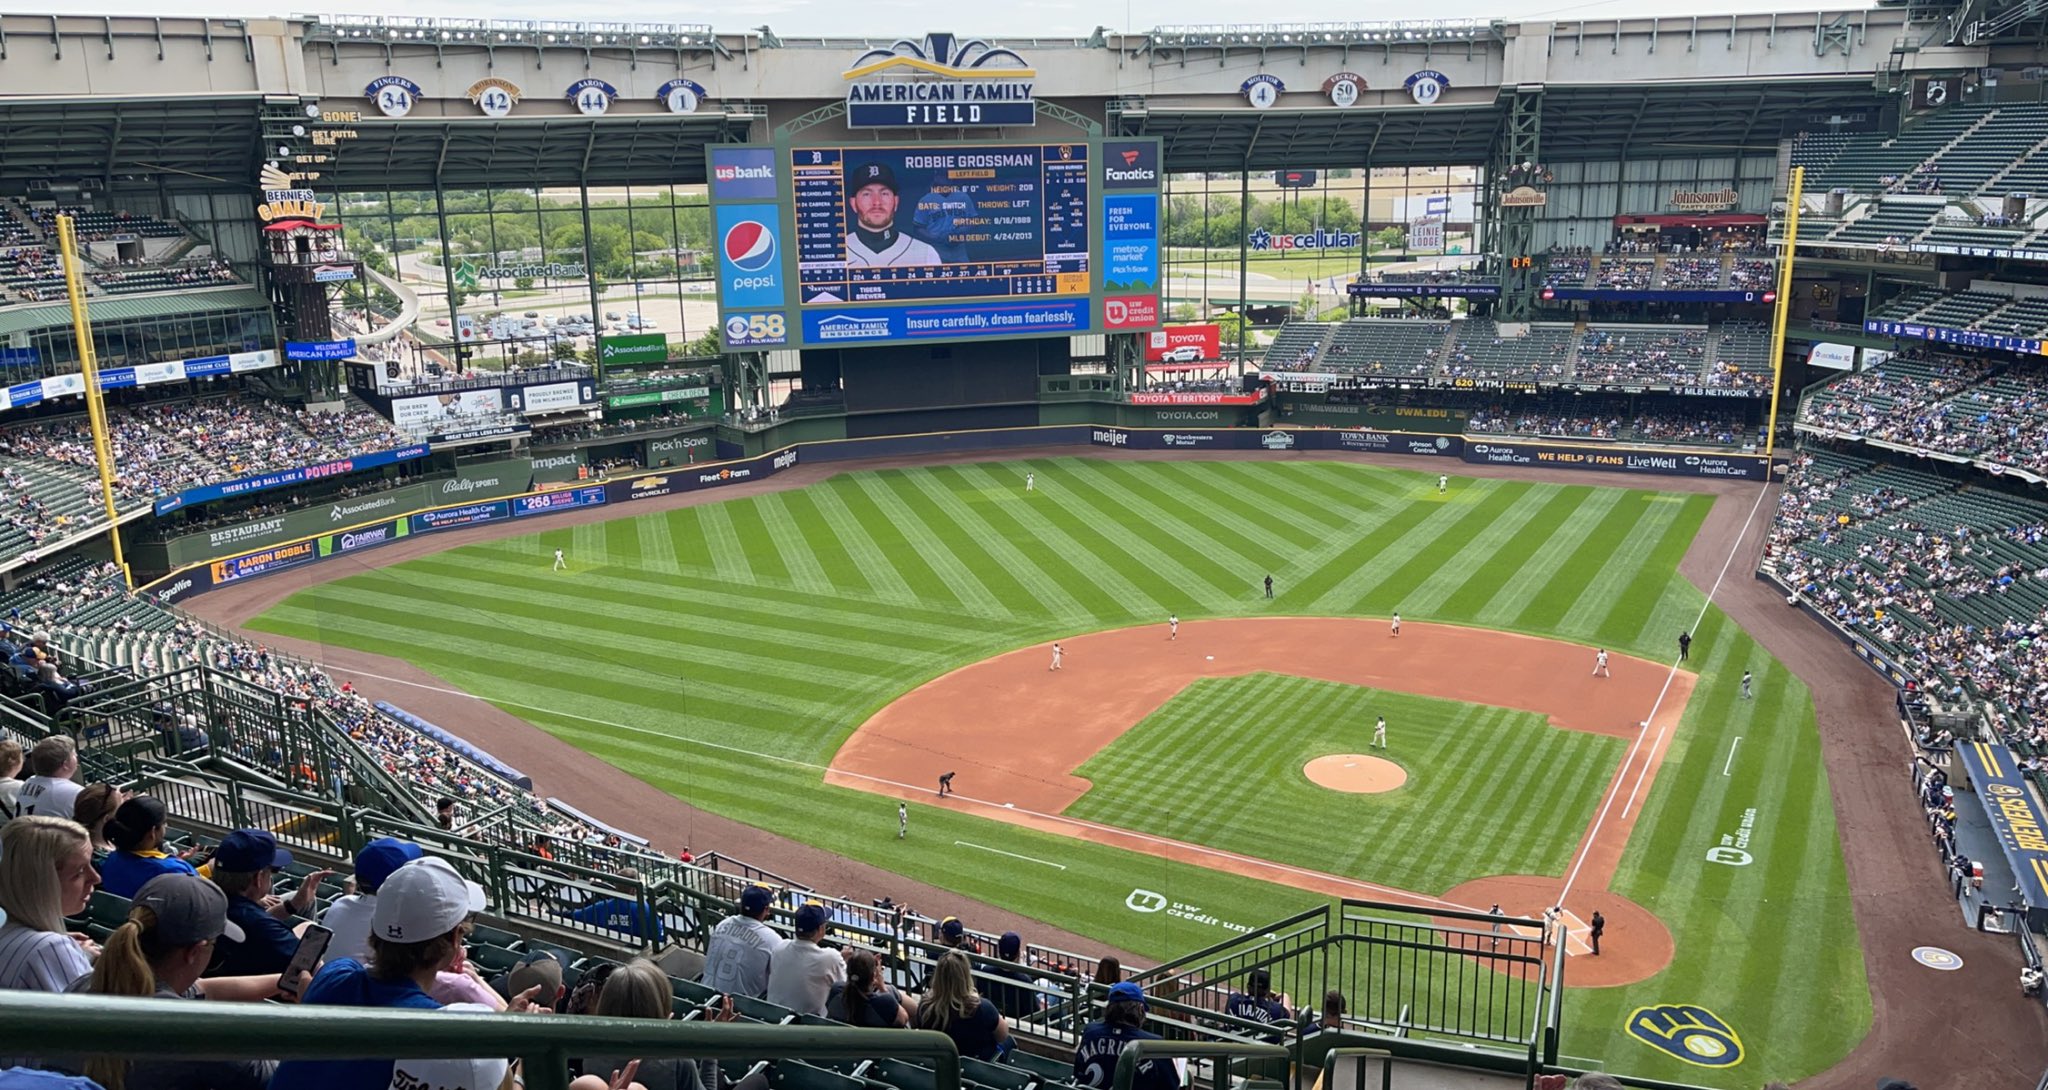 American Family Field, home of the Milwaukee Brewers